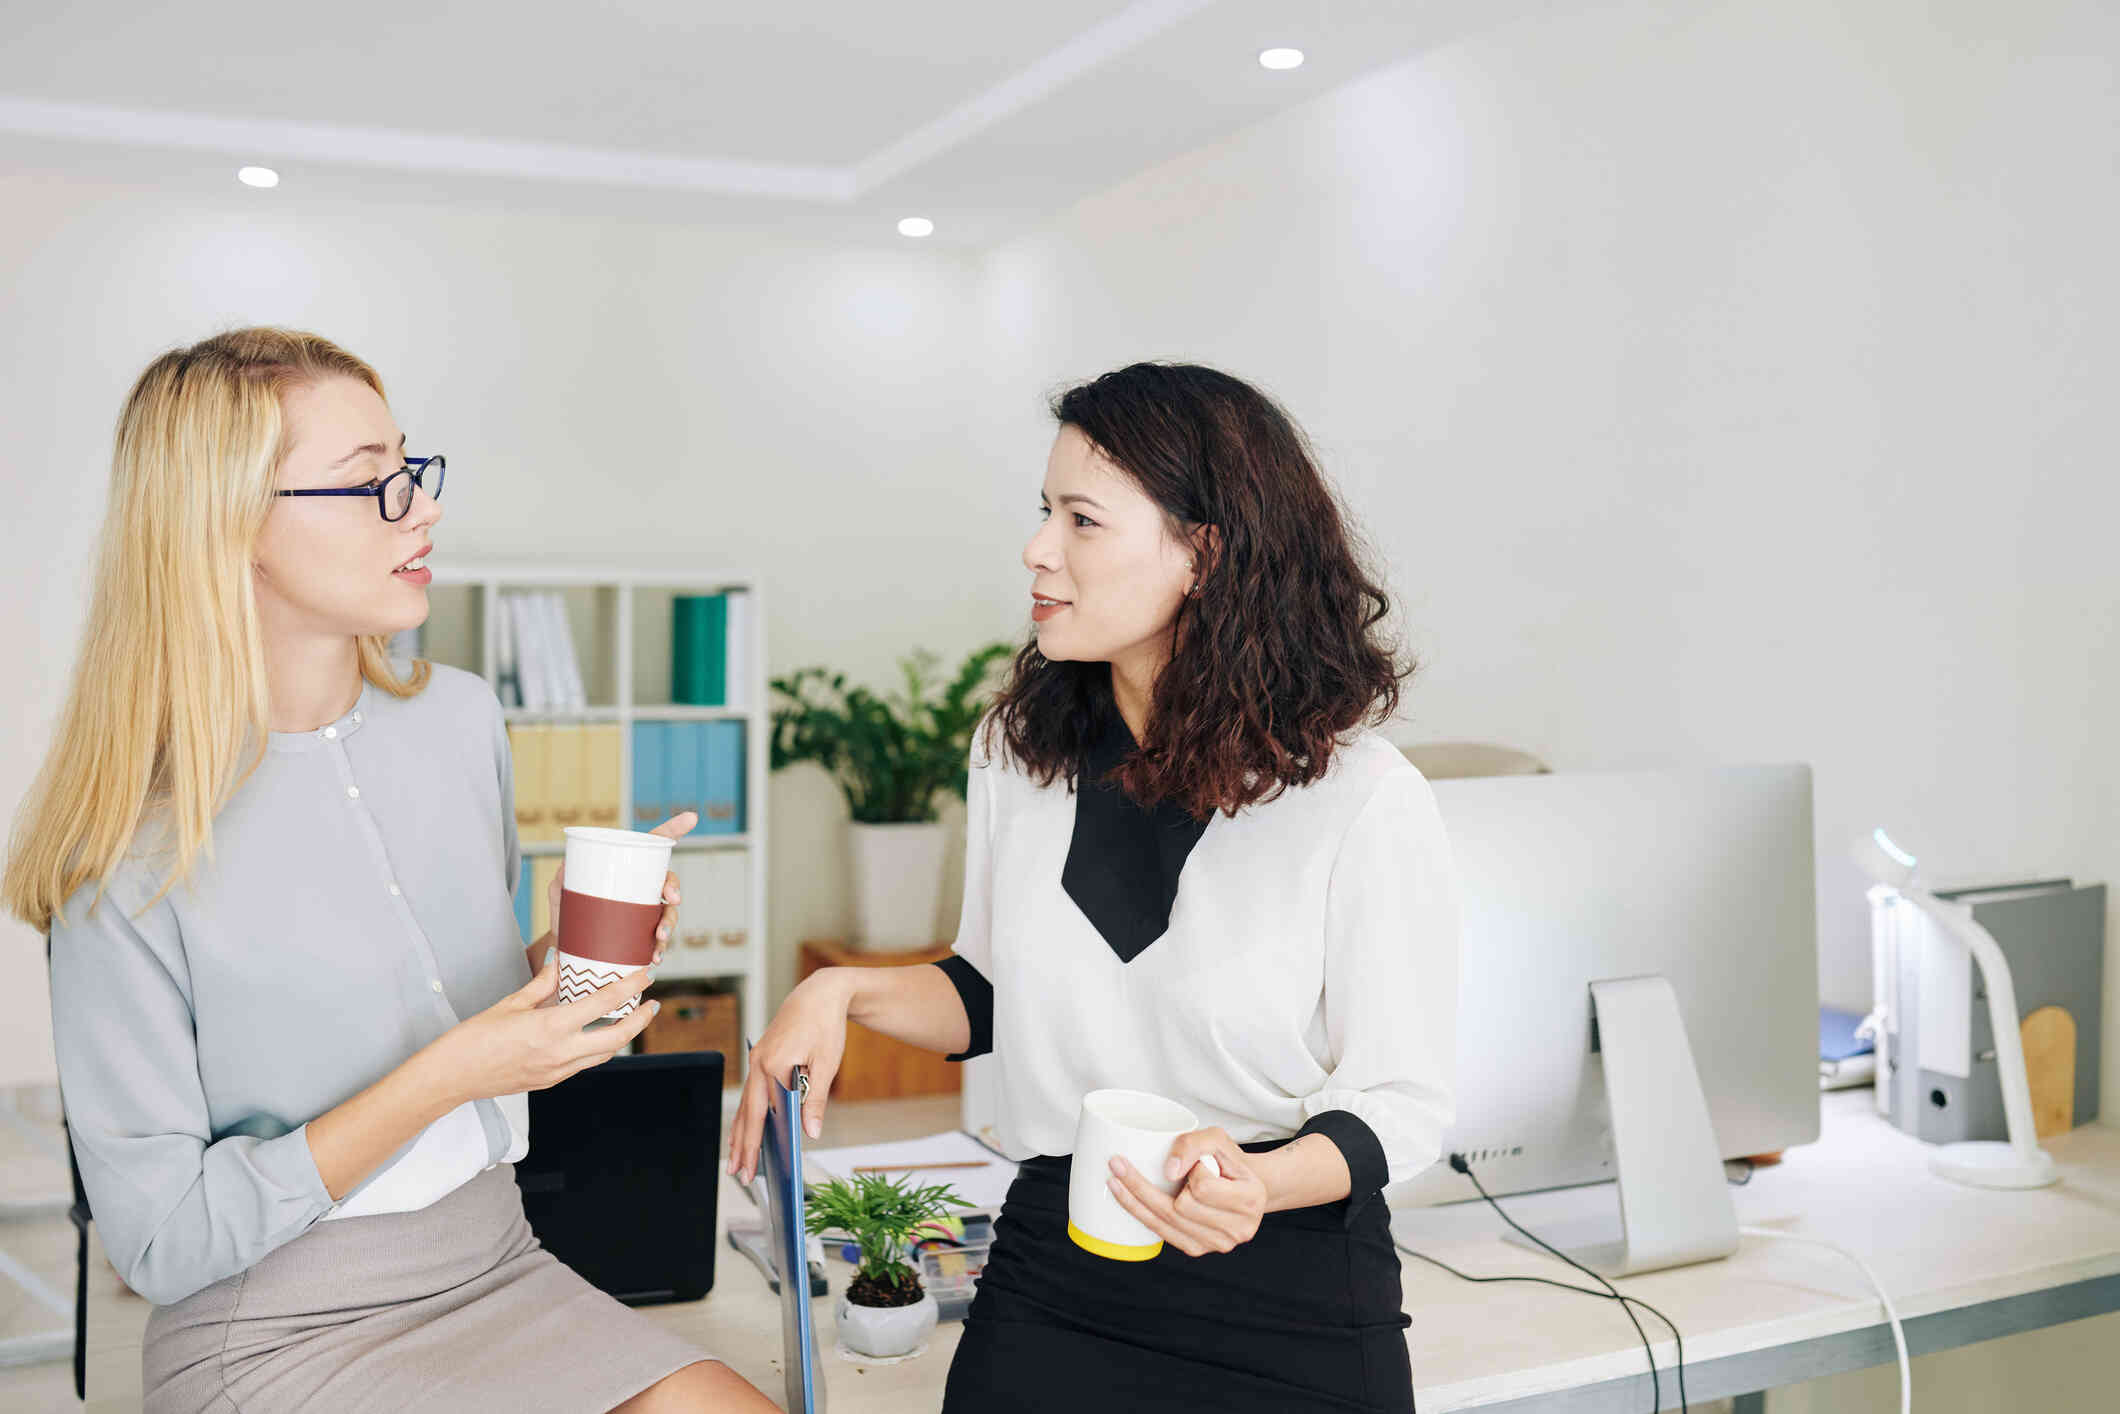 Two female coworkers stand side by side in the office and talk while holdings cups of coffee.